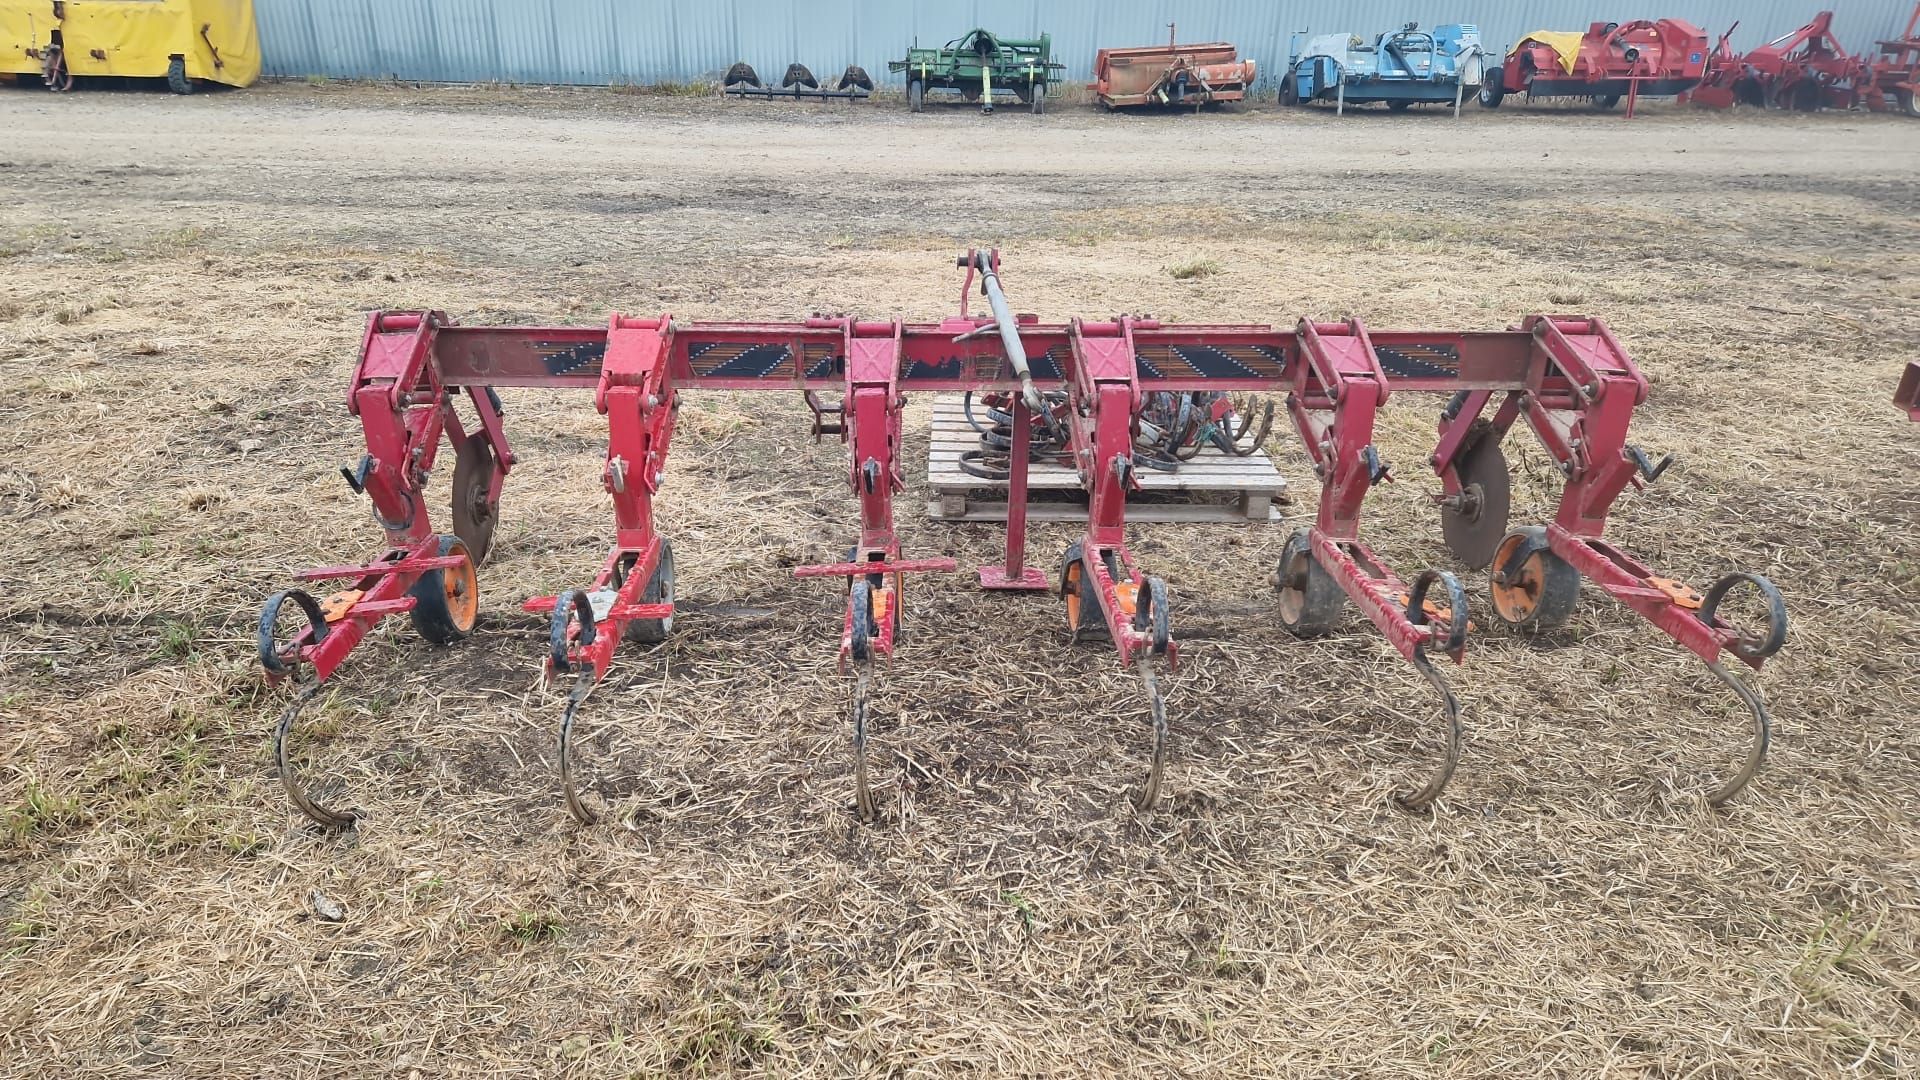 Kongskilde Vibro Corn 5 row veg hoe and spares, manual in office - Image 2 of 2